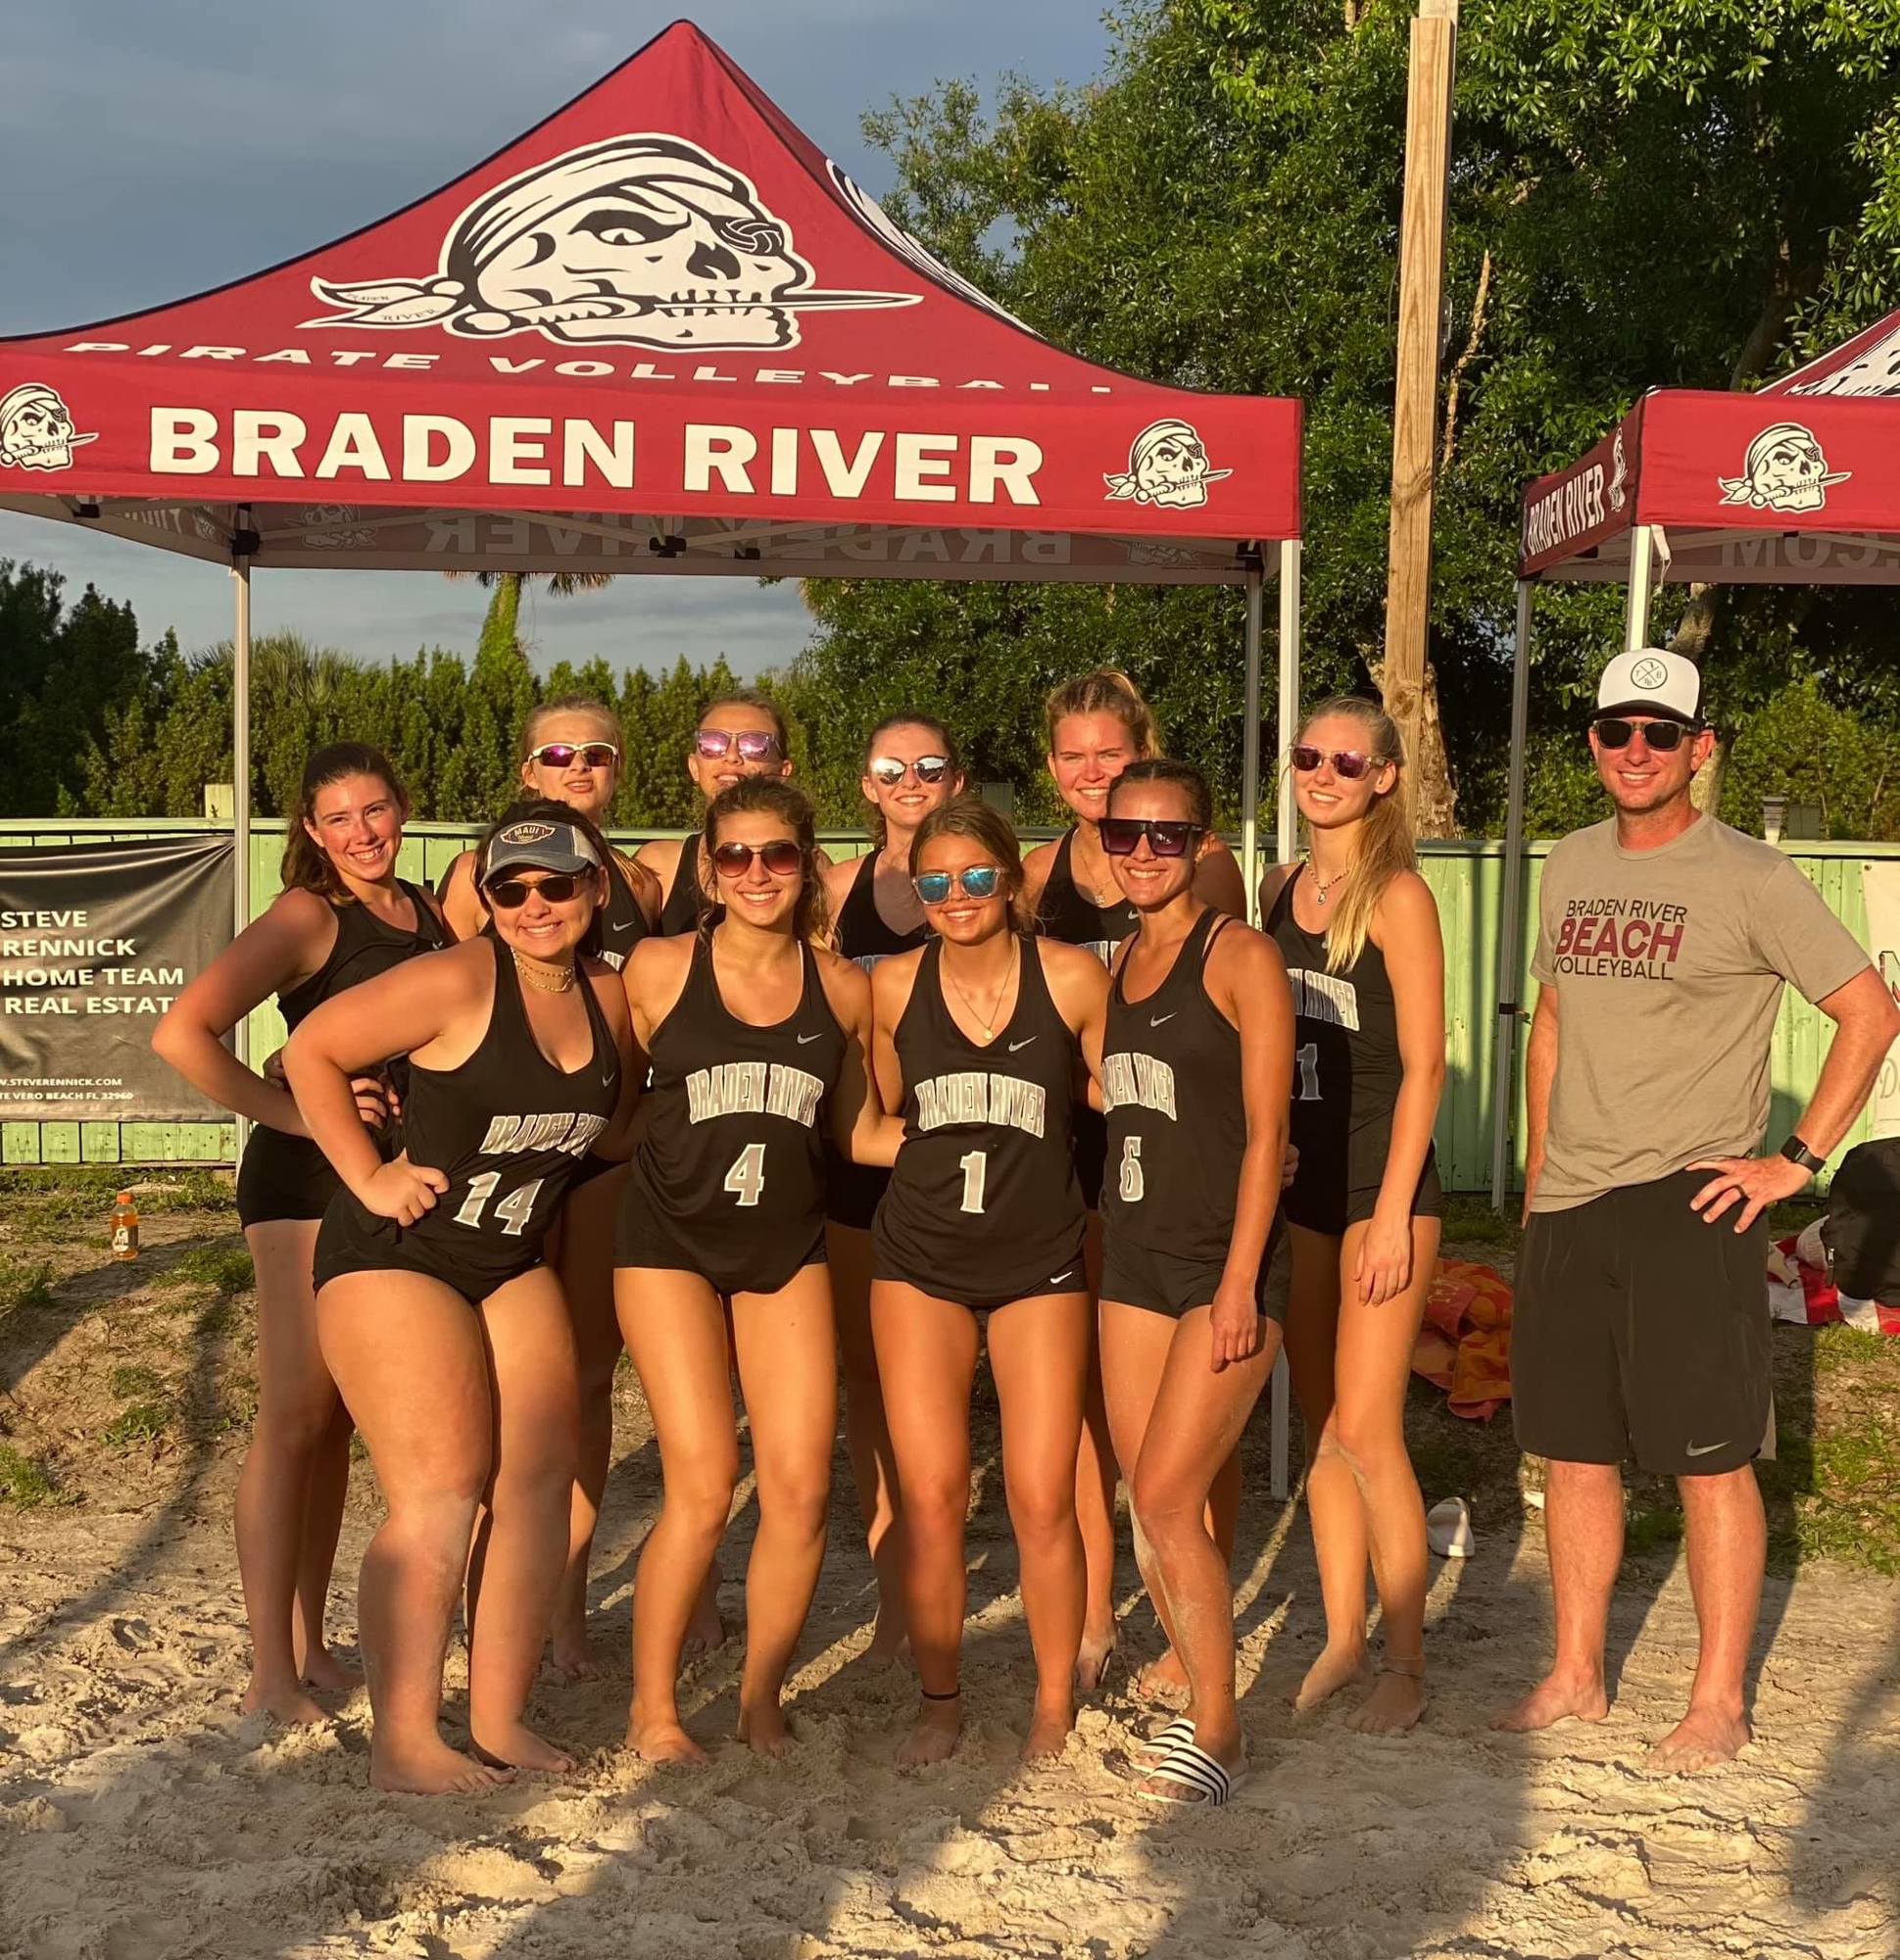 8. The Braden River High beach volleyball team finished fifth at the state tournament.